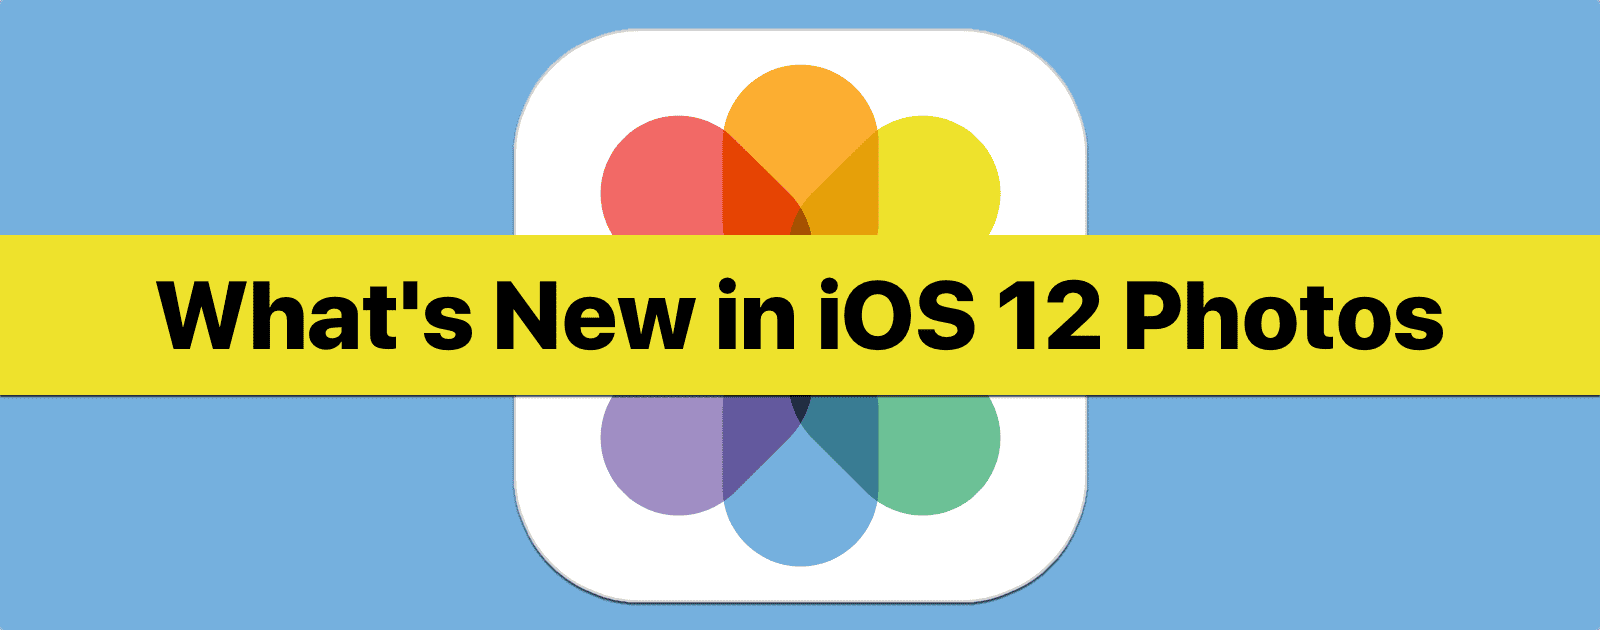 What’s New With the iOS 12 Photos App